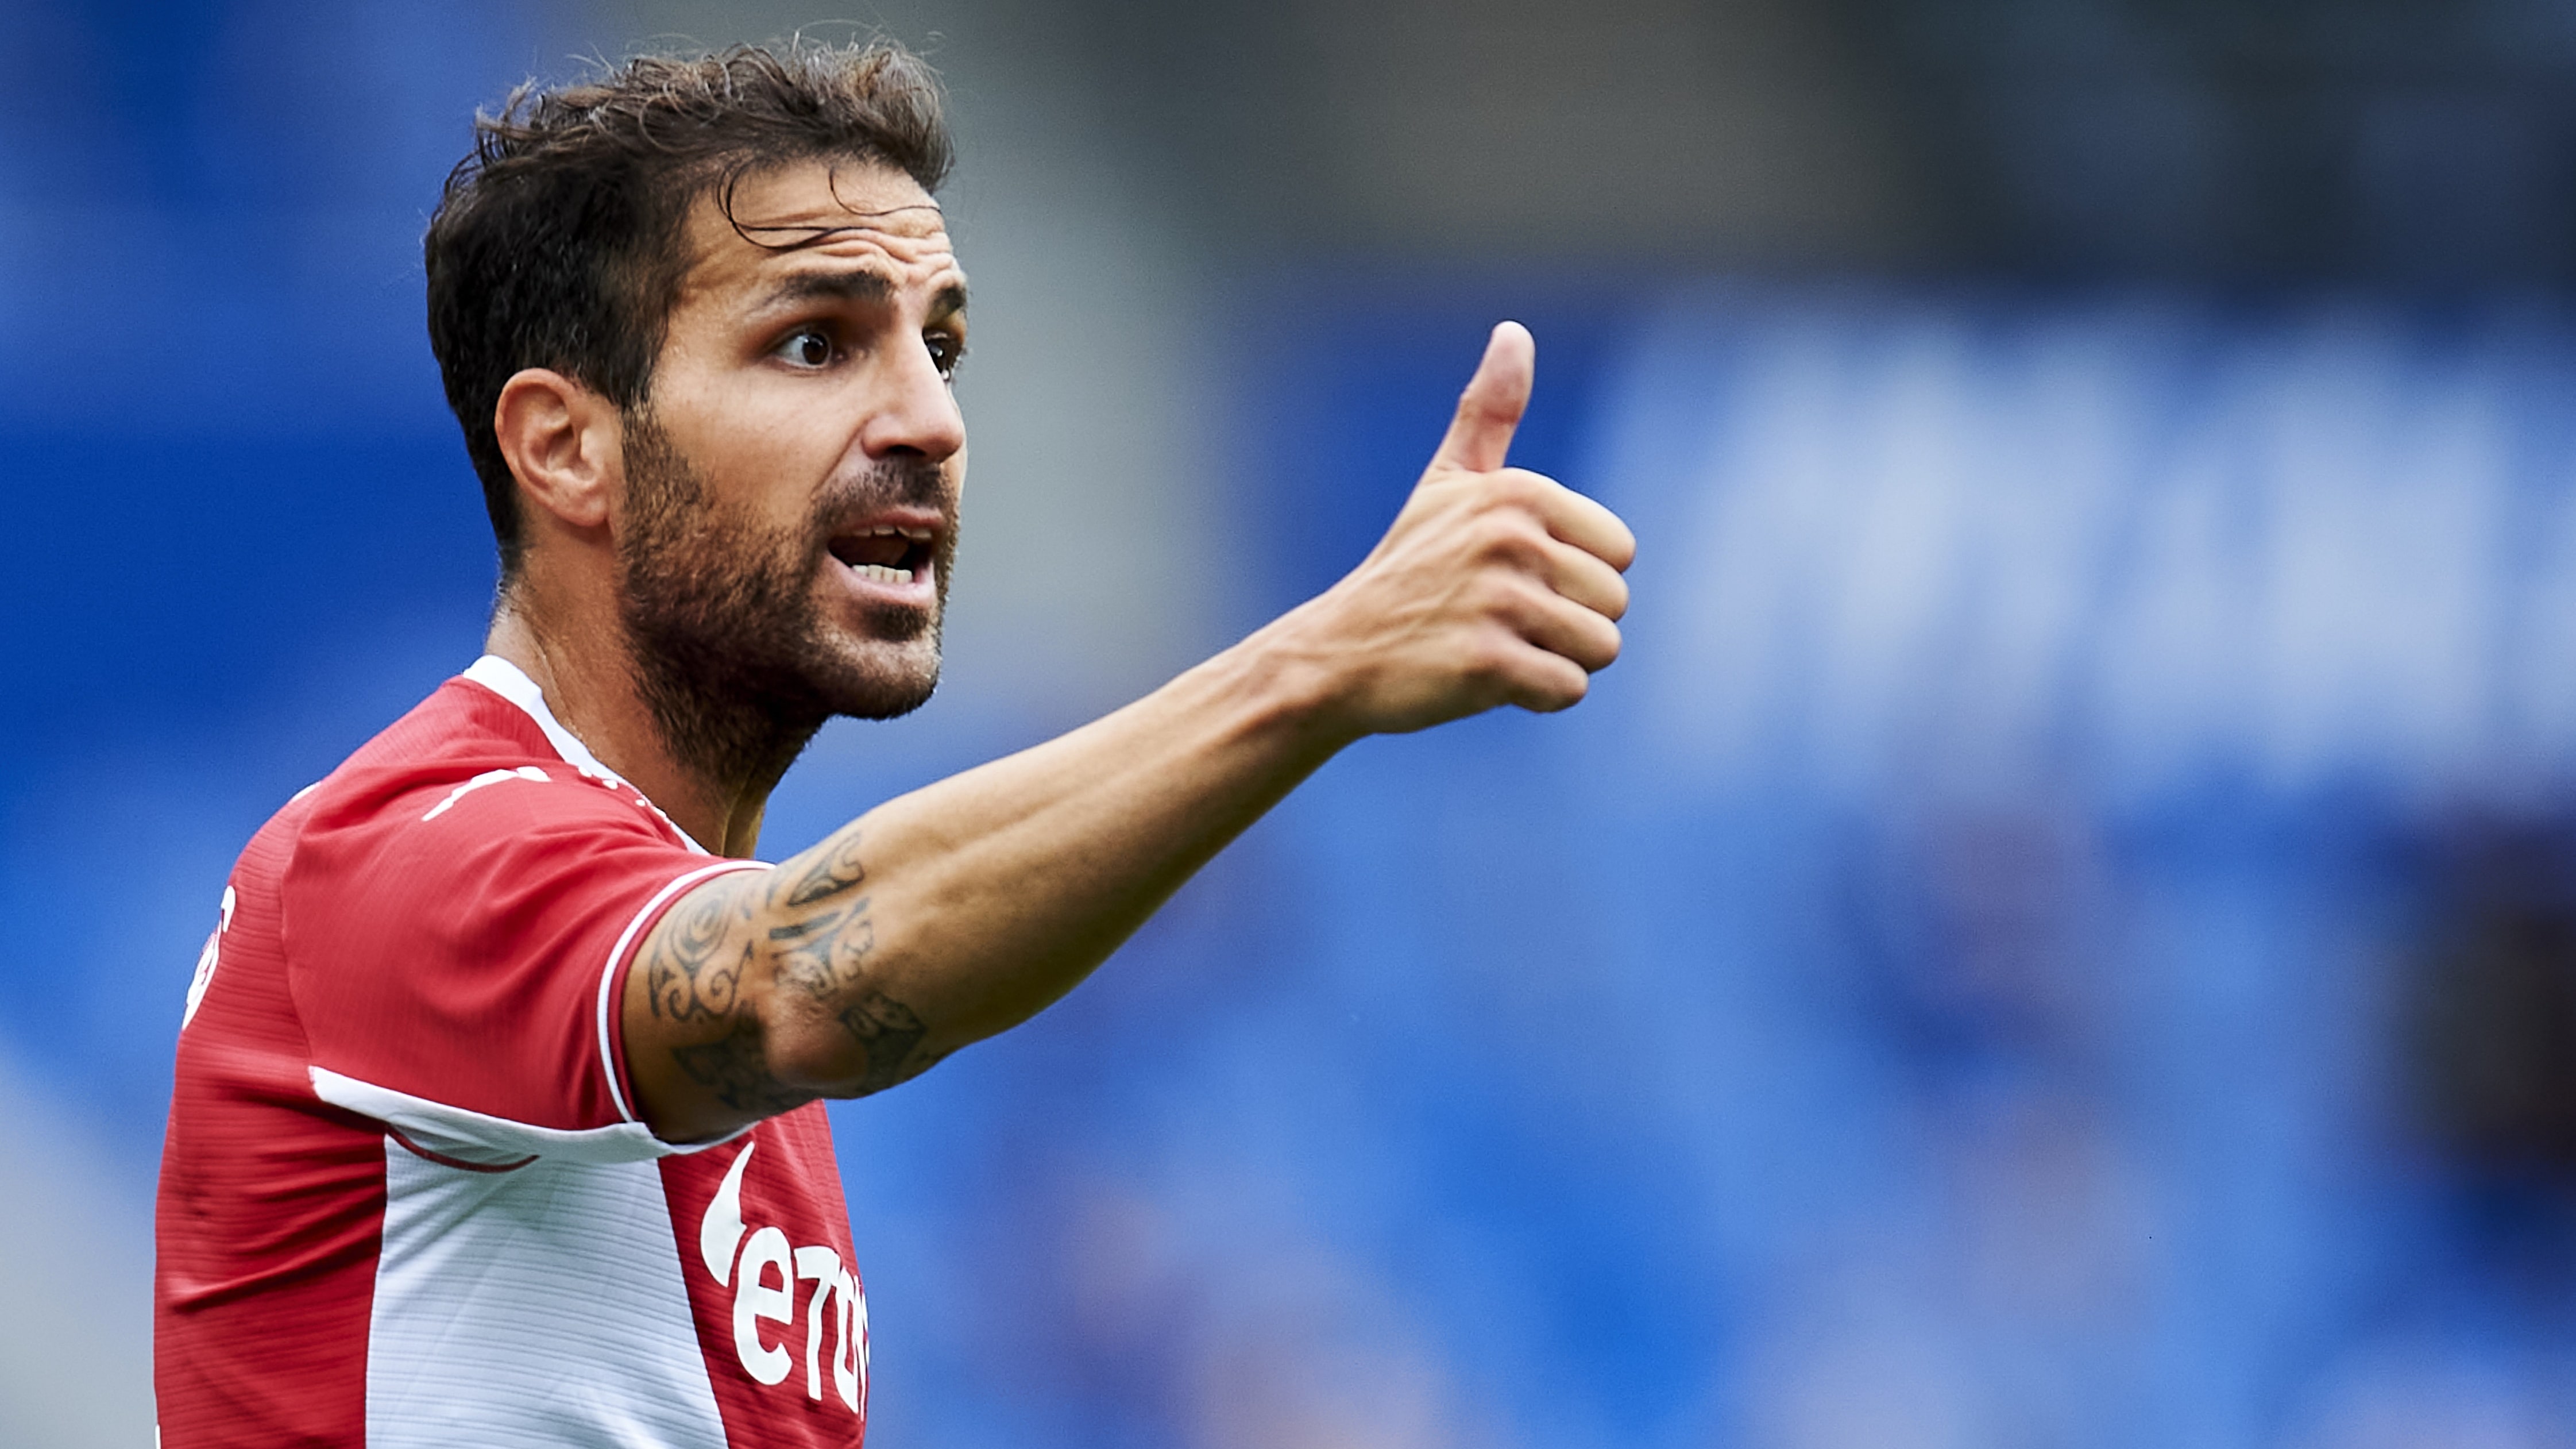 <div>Talks at 'delicate' stage: Spanish legend on cusp of A-League entrance</div>